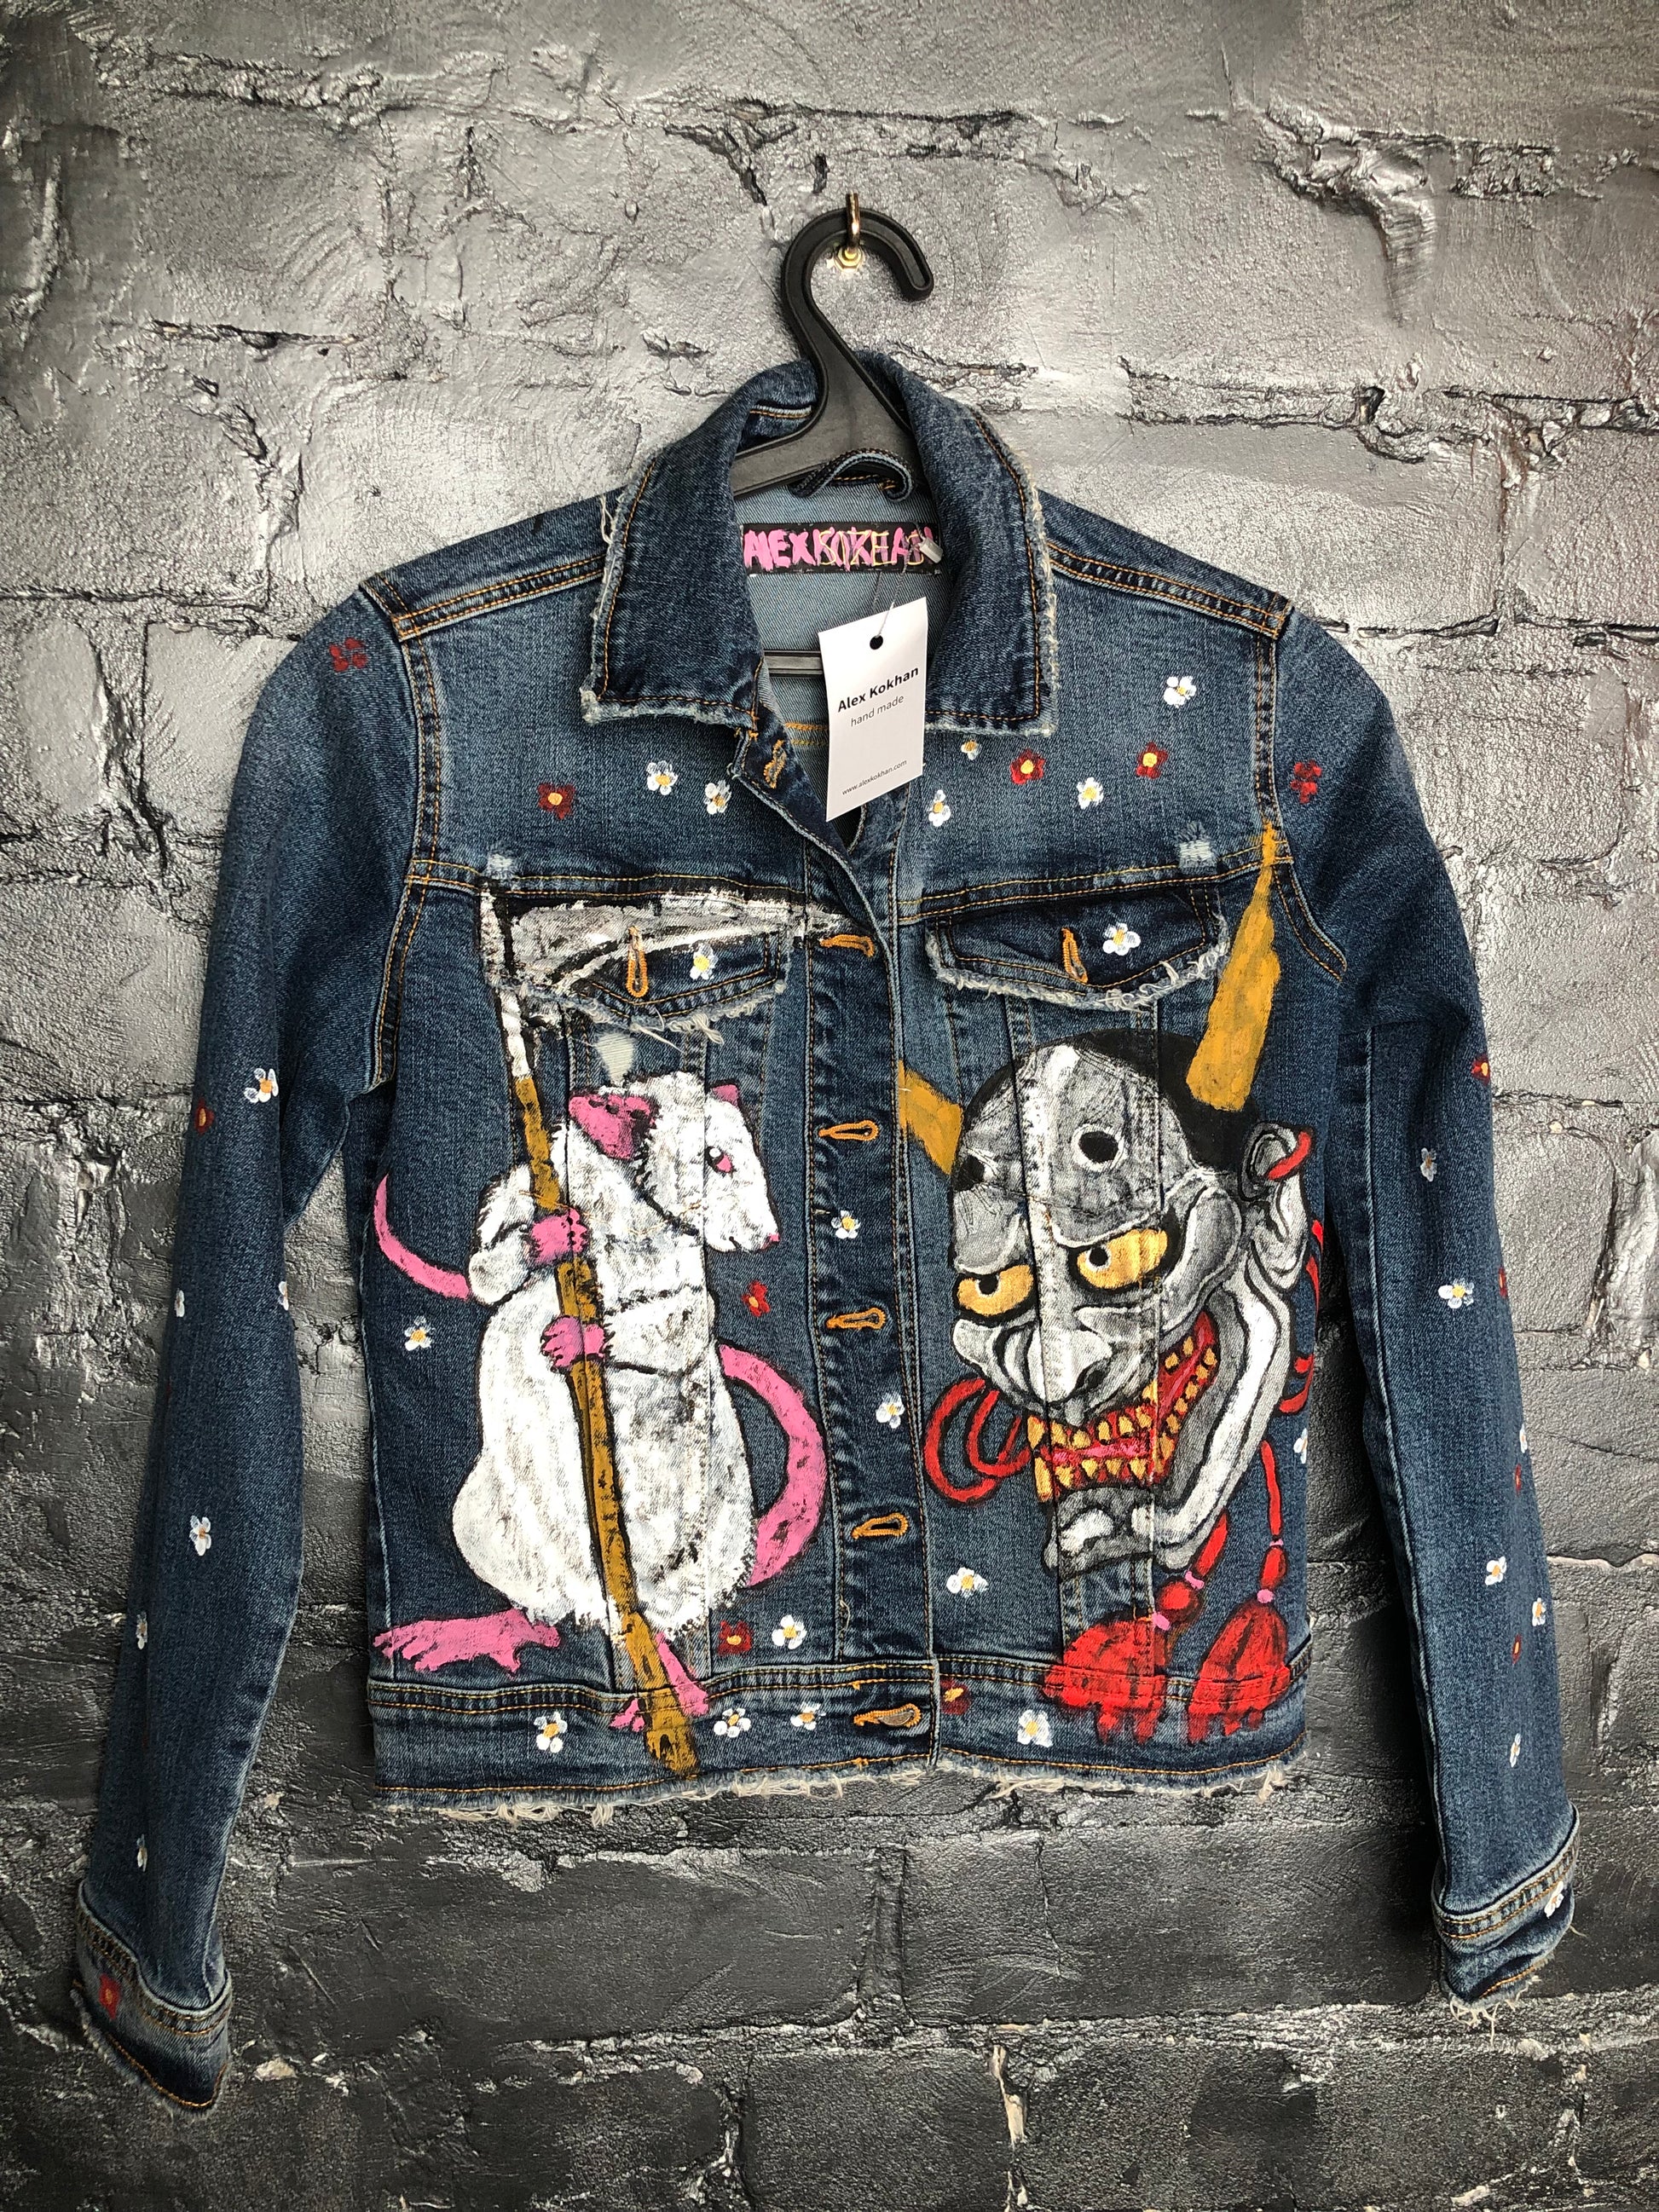 Exceptionally beautiful hand-painted women's denim jacket